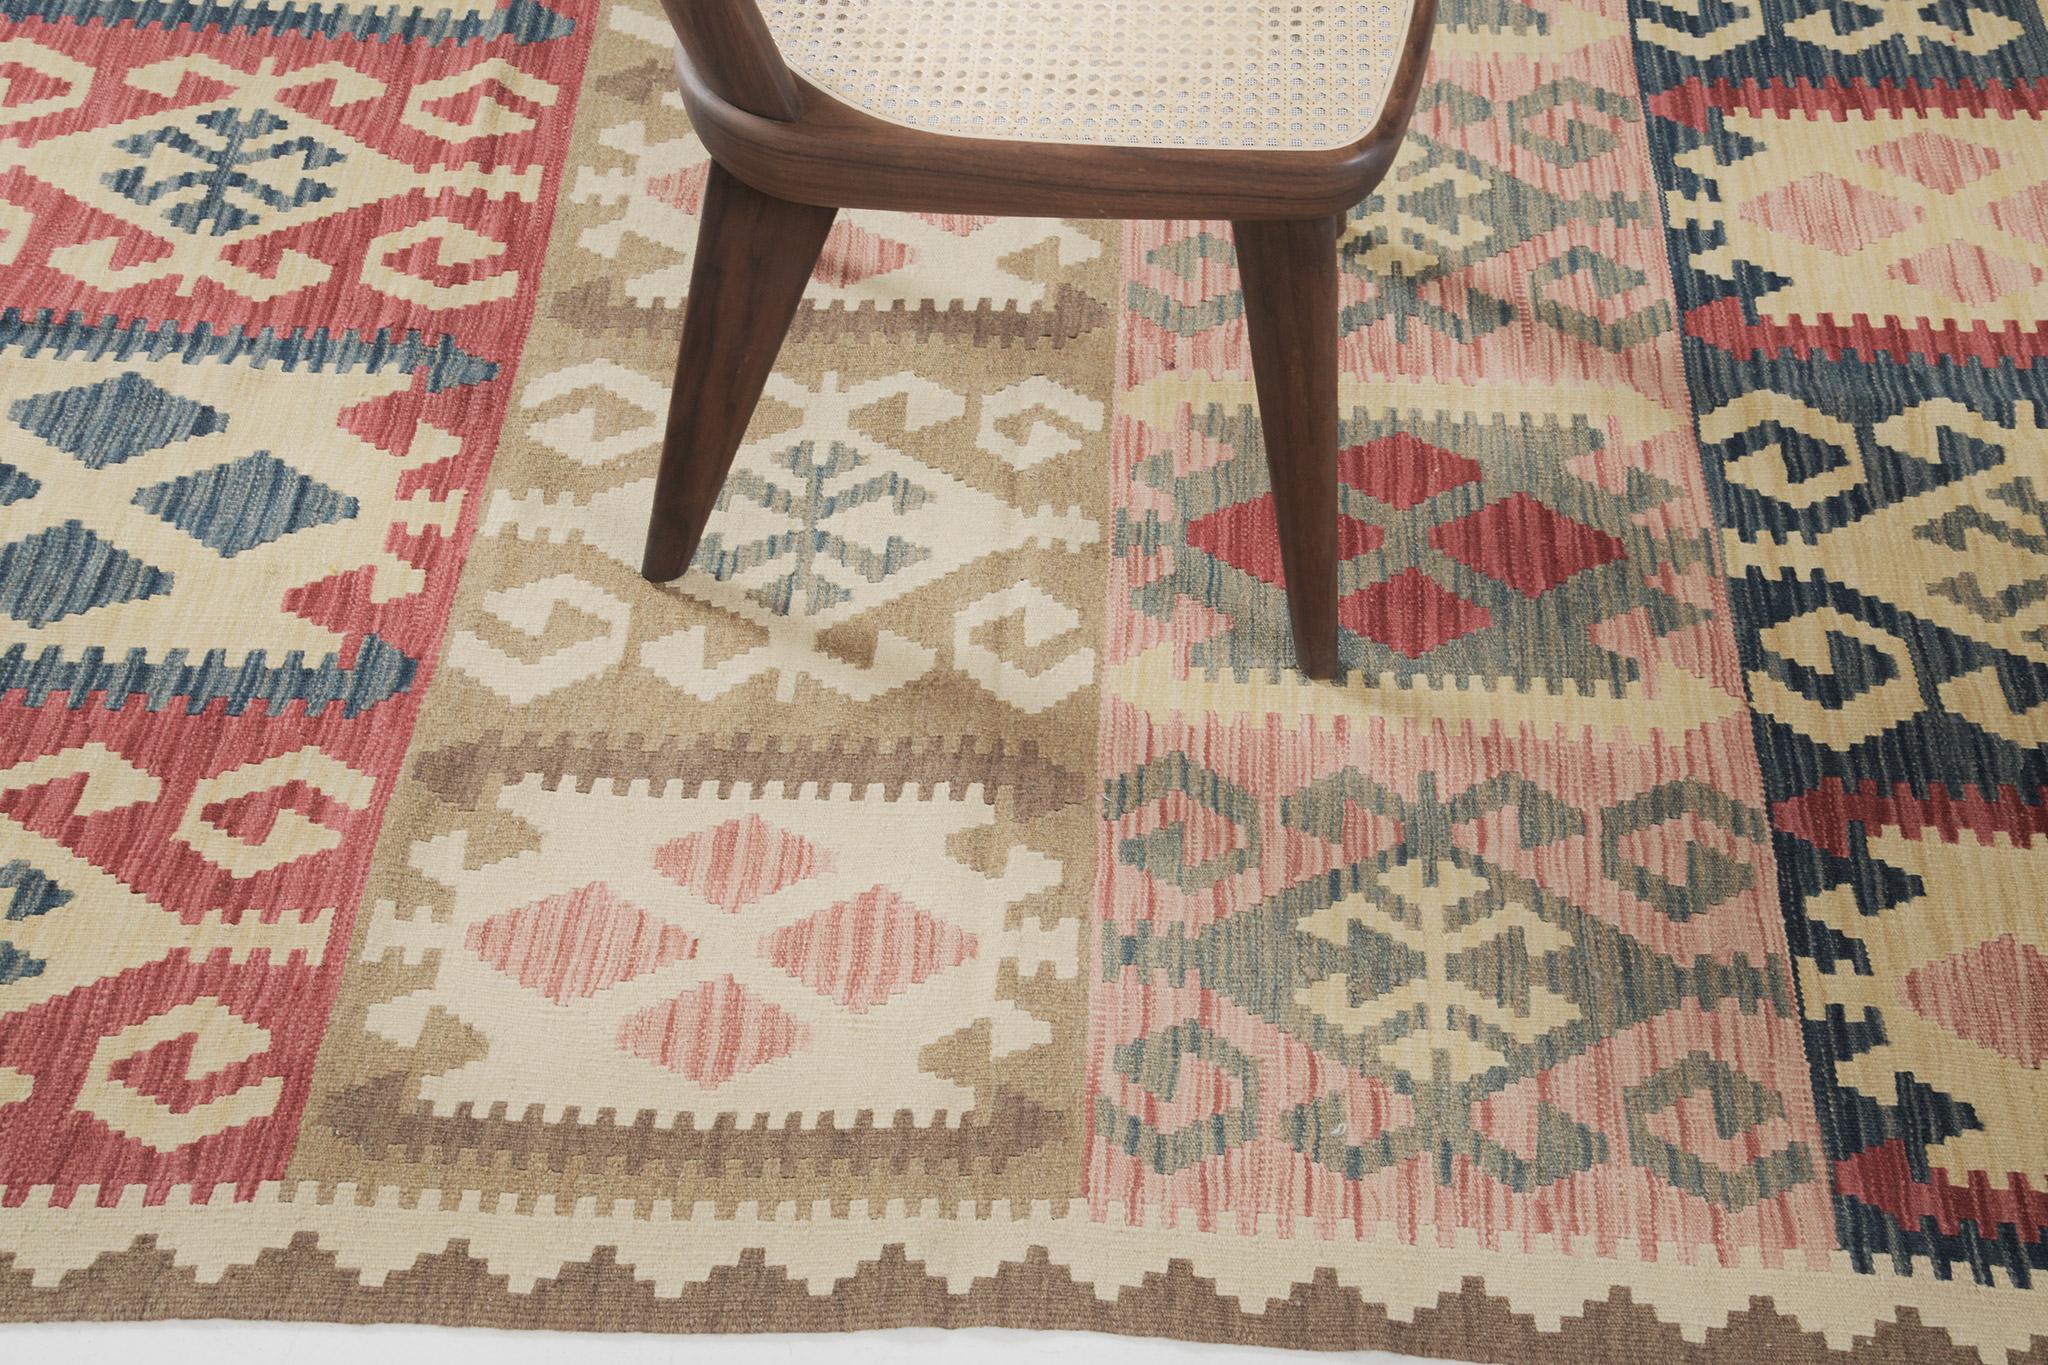 The motifs are in panel layouts that create a cheerful and amazing design for a large variety of interiors. A stunningly beautiful vintage-styled flatweave Kilim is banded with zigzag patterns, horns, and crabs in alternates of cream, red, midnight